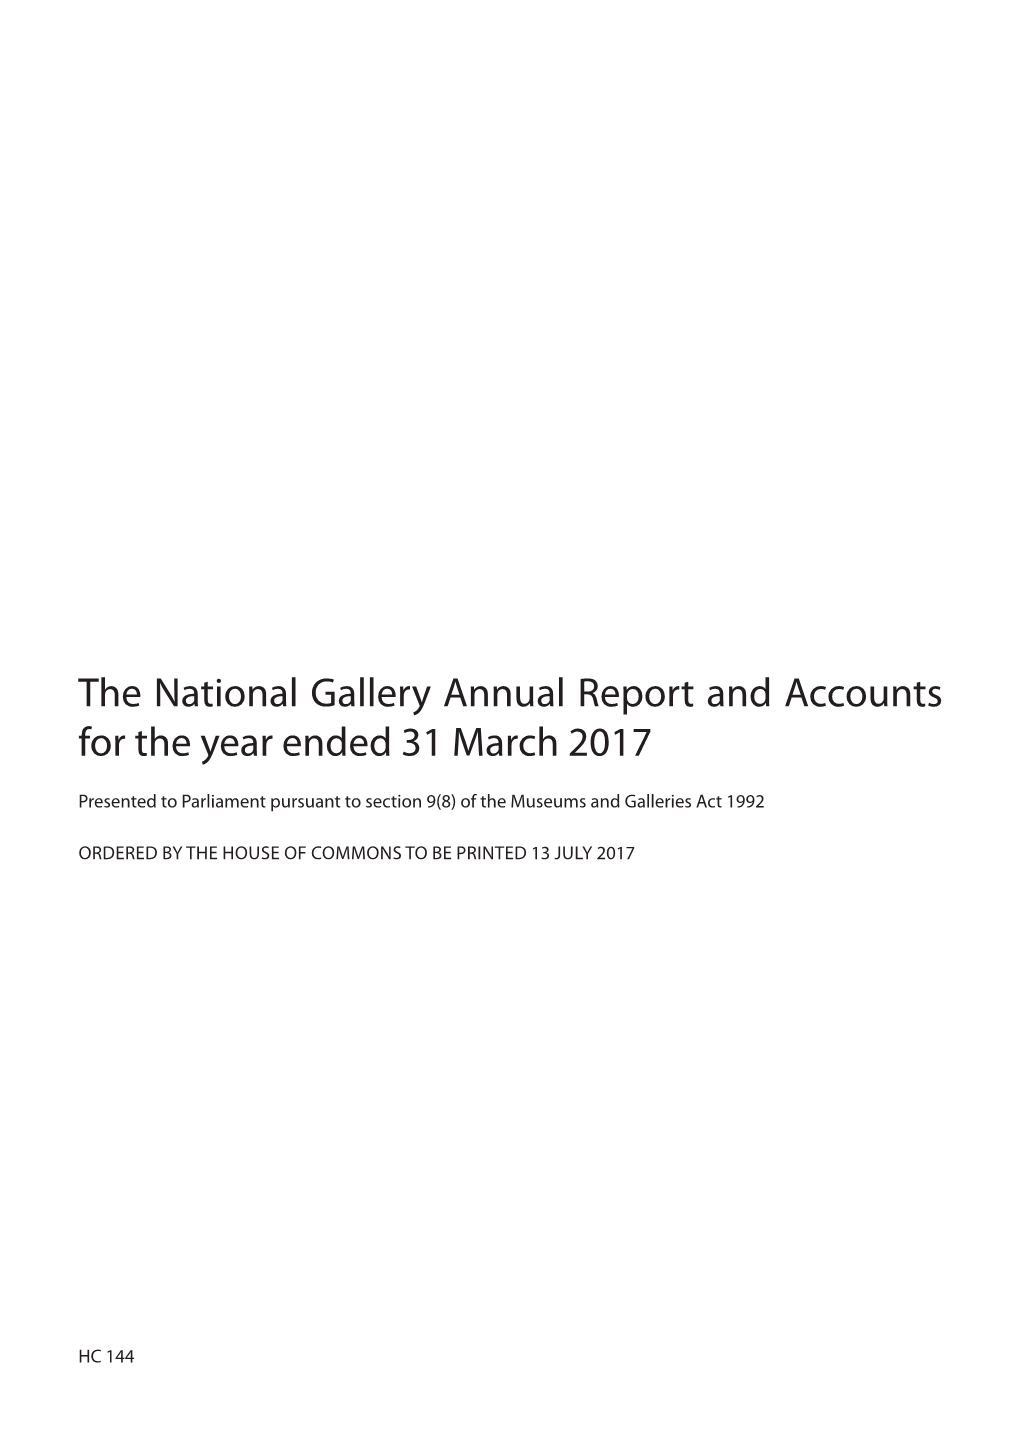 The National Gallery Annual Report and Accounts for the Year Ended 31 March 2017